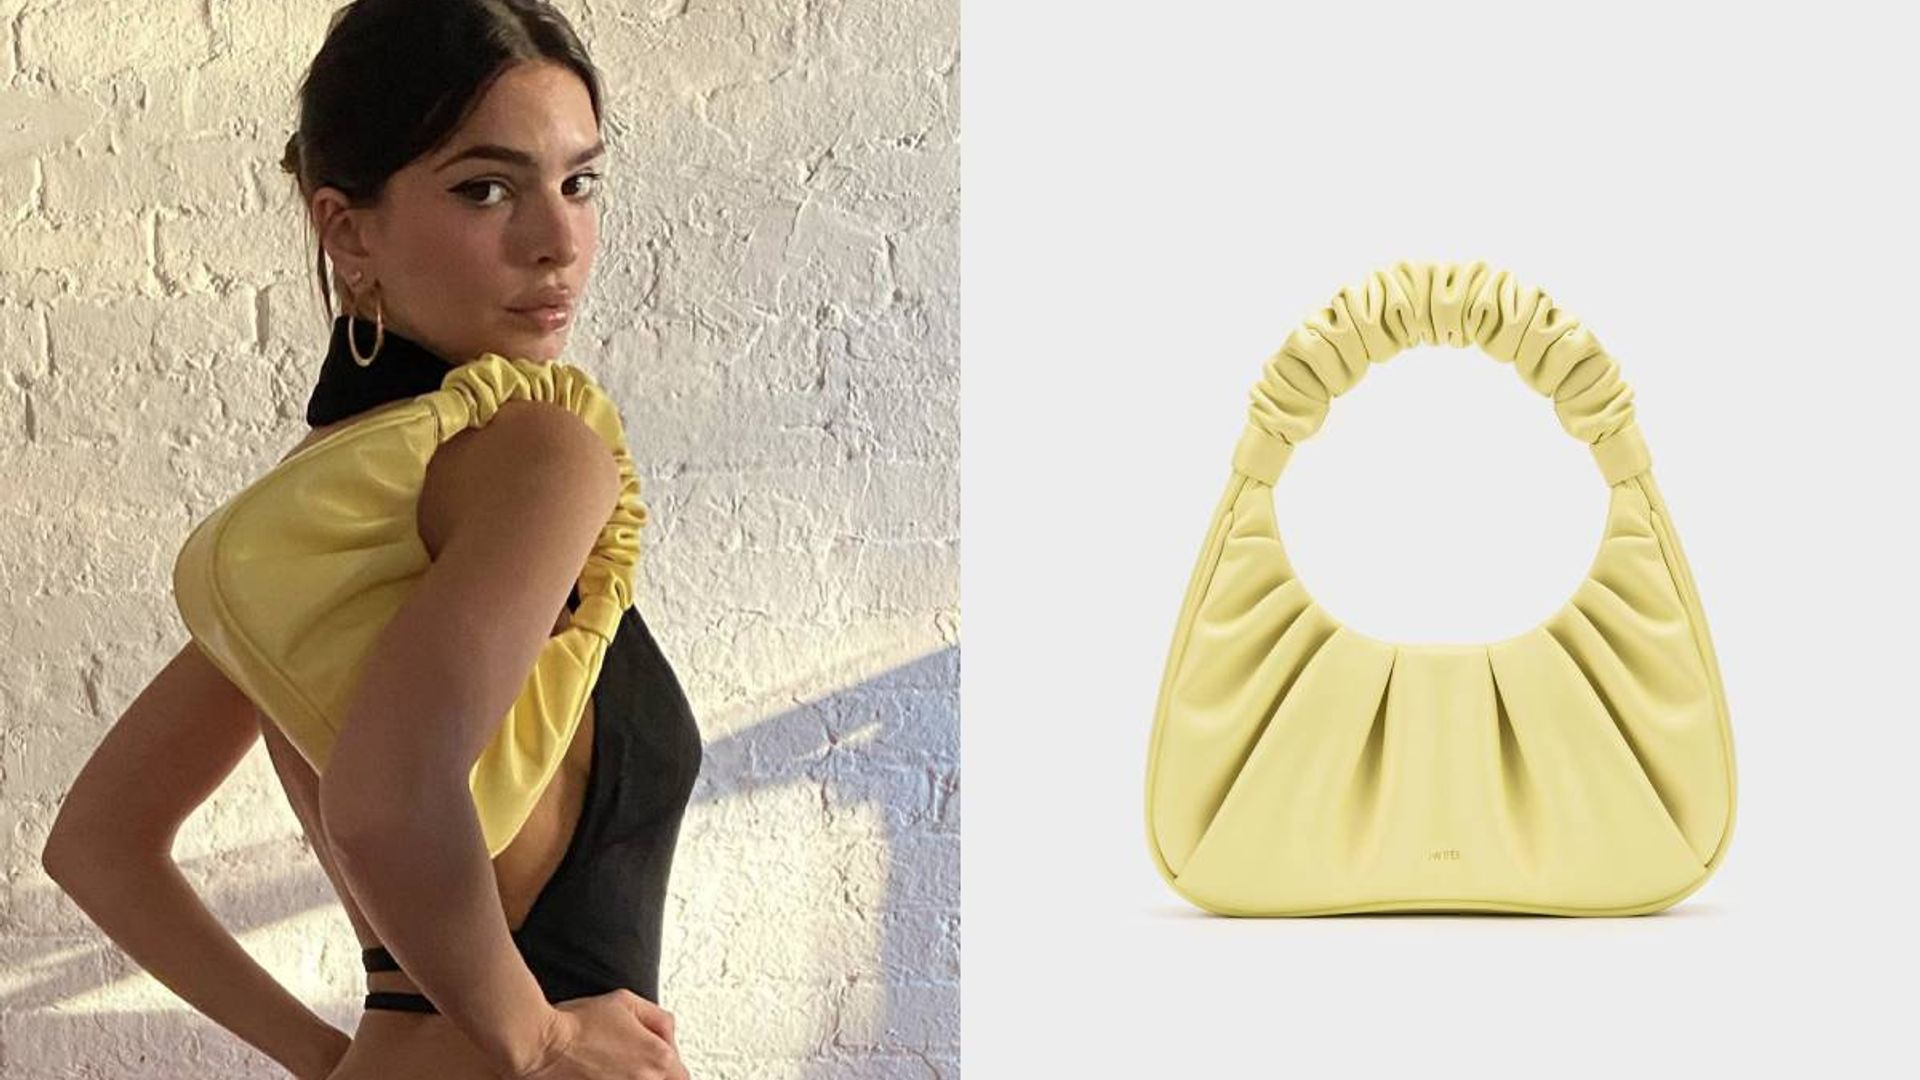 Emily Ratajkowski’s yellow handbag is perfect for summer - and it’s less than $80